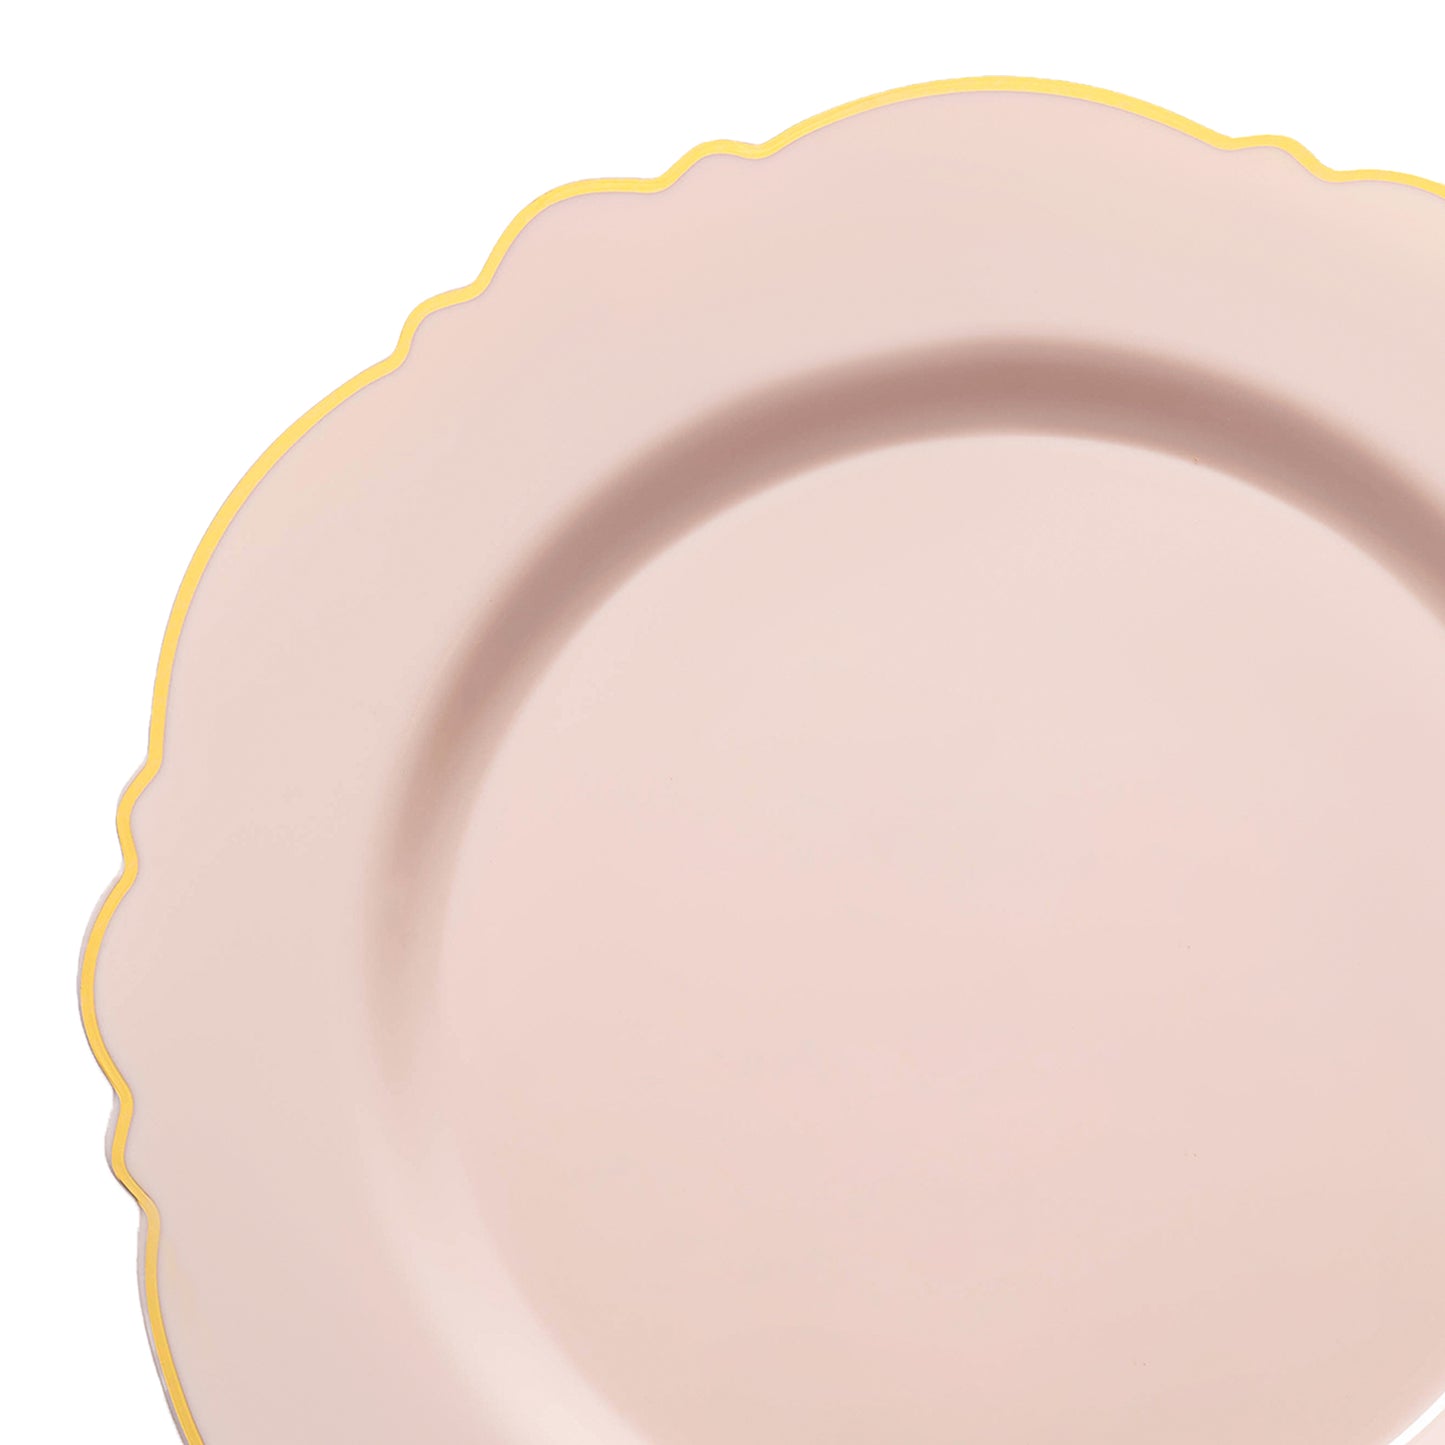 Pink with Gold Rim Round Blossom Plastic Salad Plates (7.5") | The Kaya Collection